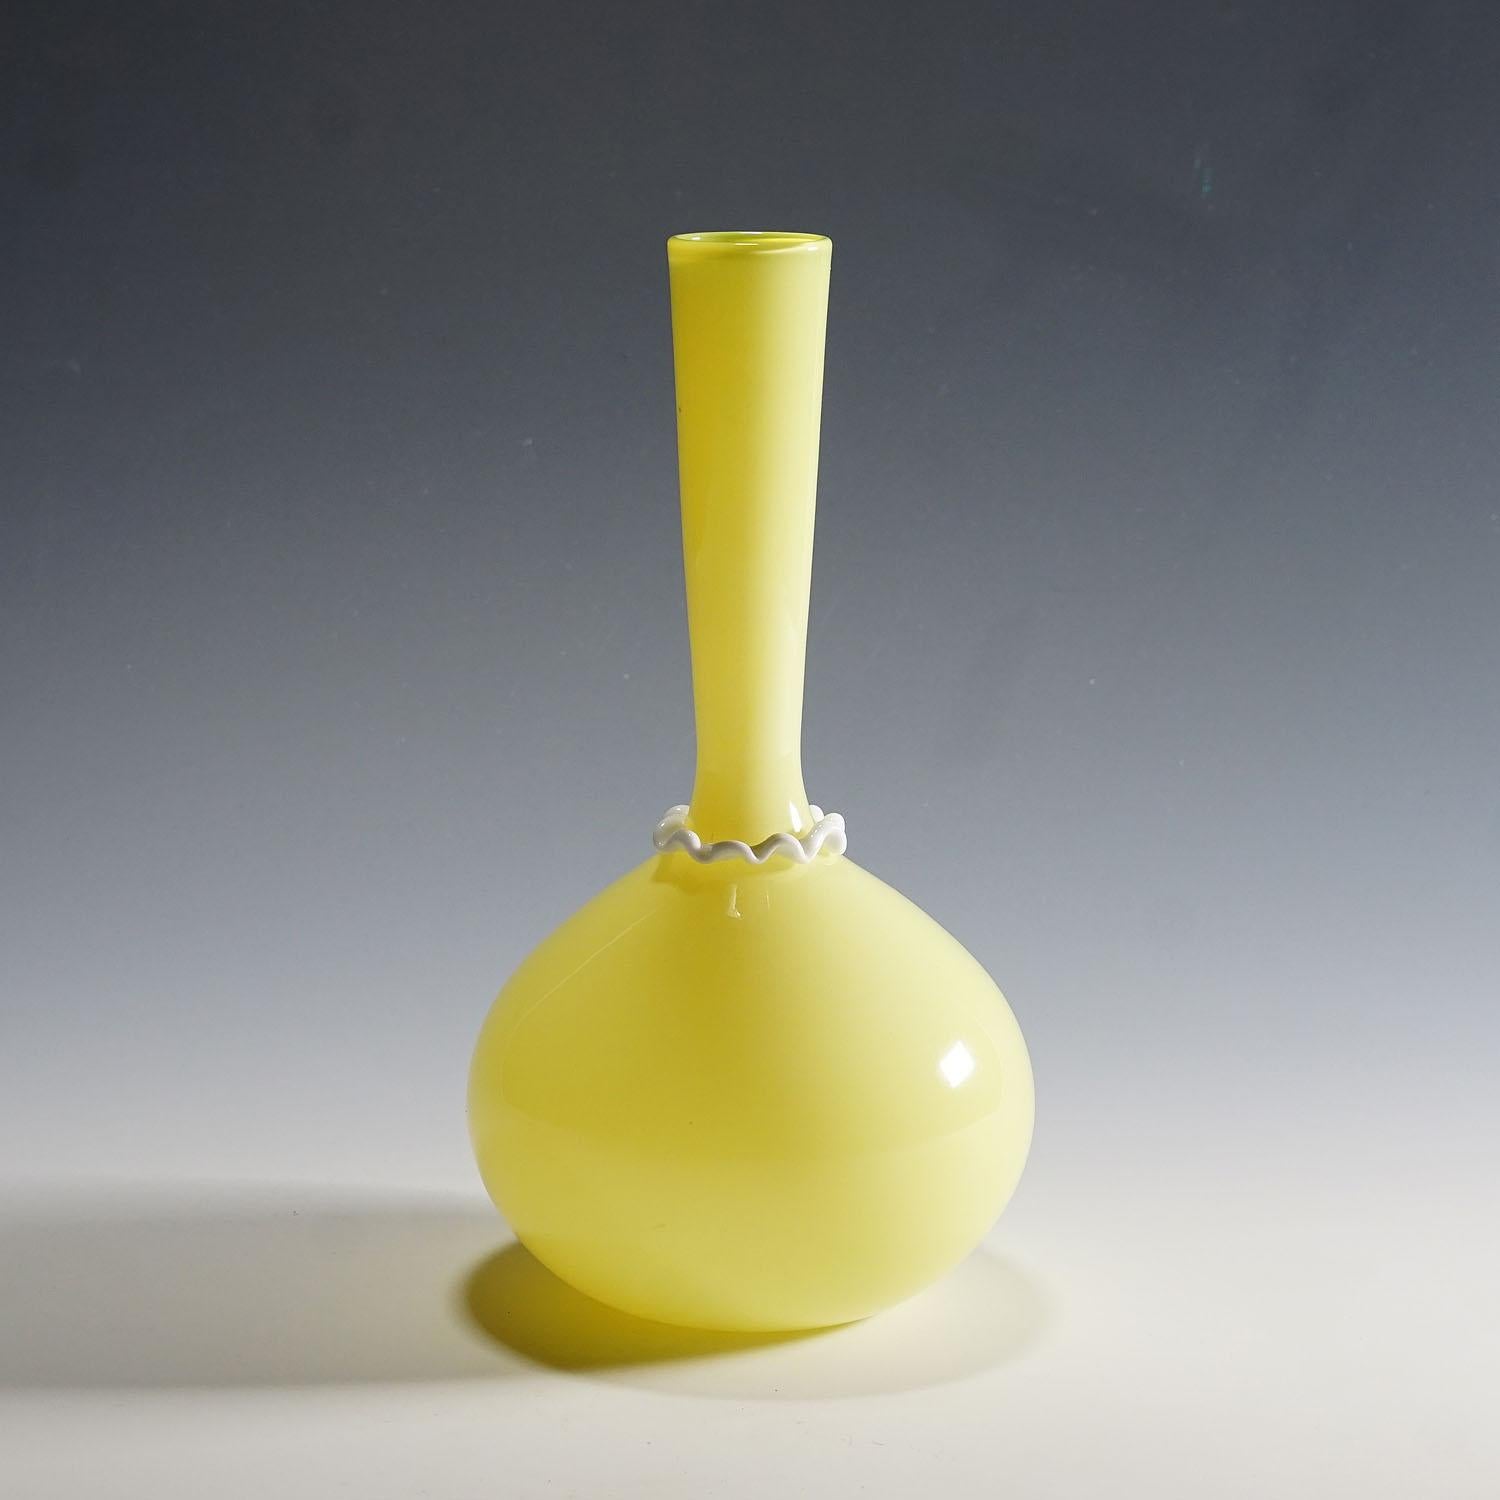 Vittorio Zecchin for Venini Soffiato Vase in Yellow and Lattimo Glass ca. 1950s

A Venini soffiato (mouth blown) glass vase with very thin opaque yellow glass, clear glass overlay and a pinched ring in lattimo glass (milk glass) on the base of the